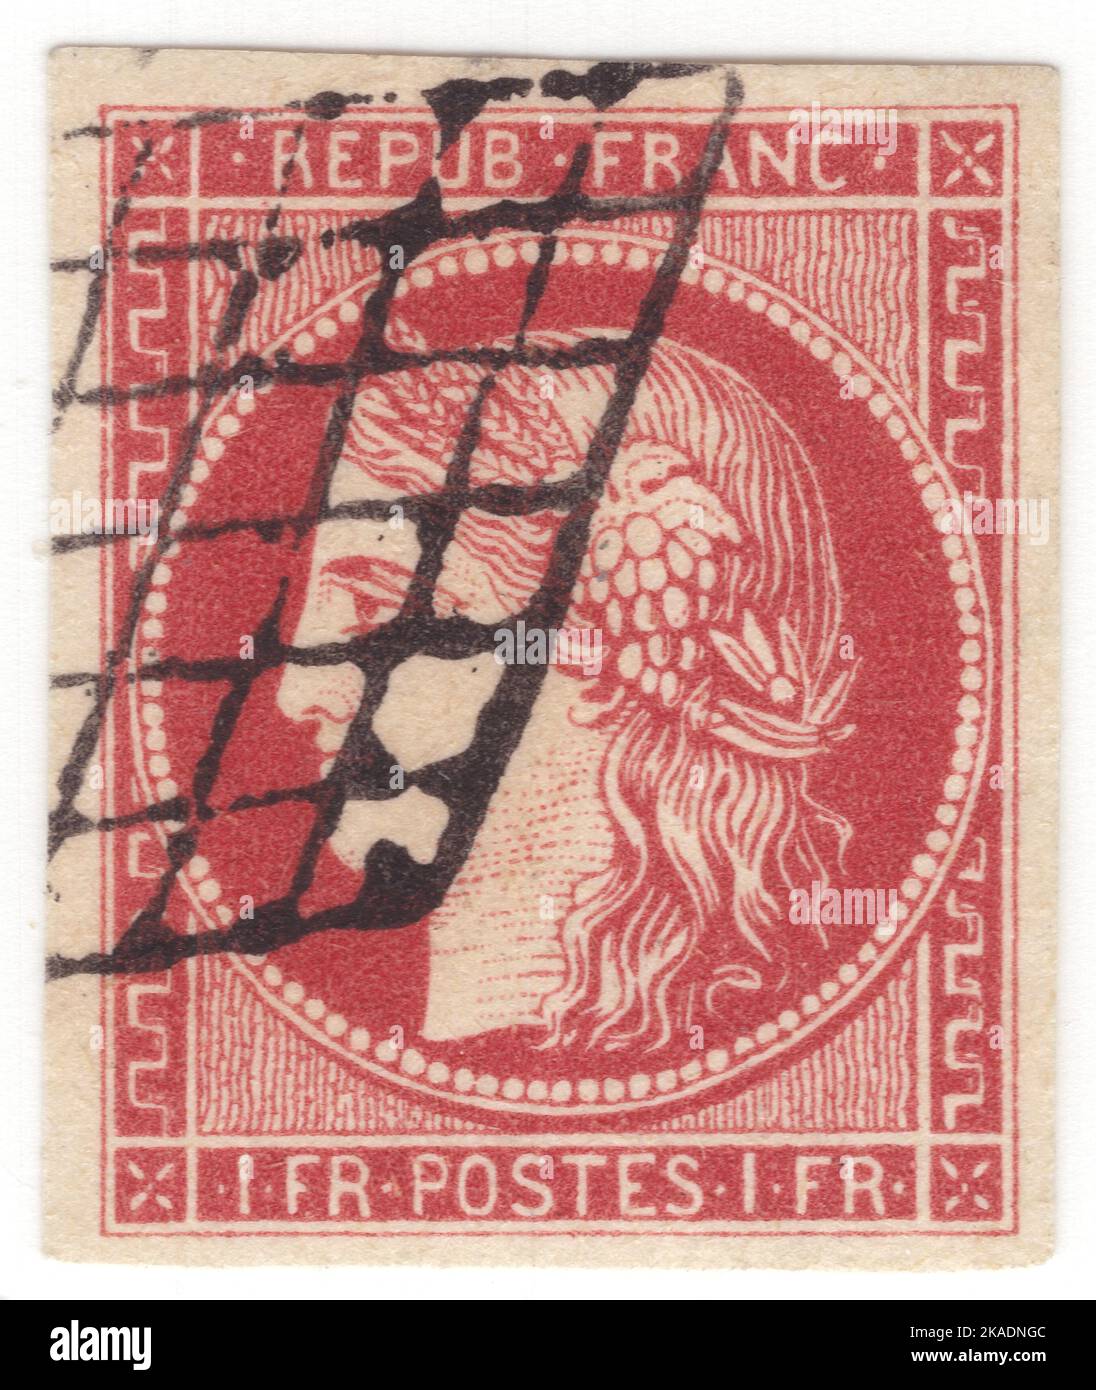 FRANCE - 1849: An 1 frank light carmine postage stamp depicting Ceres — Goddess of agriculture, fertility, grains, the harvest, motherhood, the earth, and cultivated crops Stock Photo